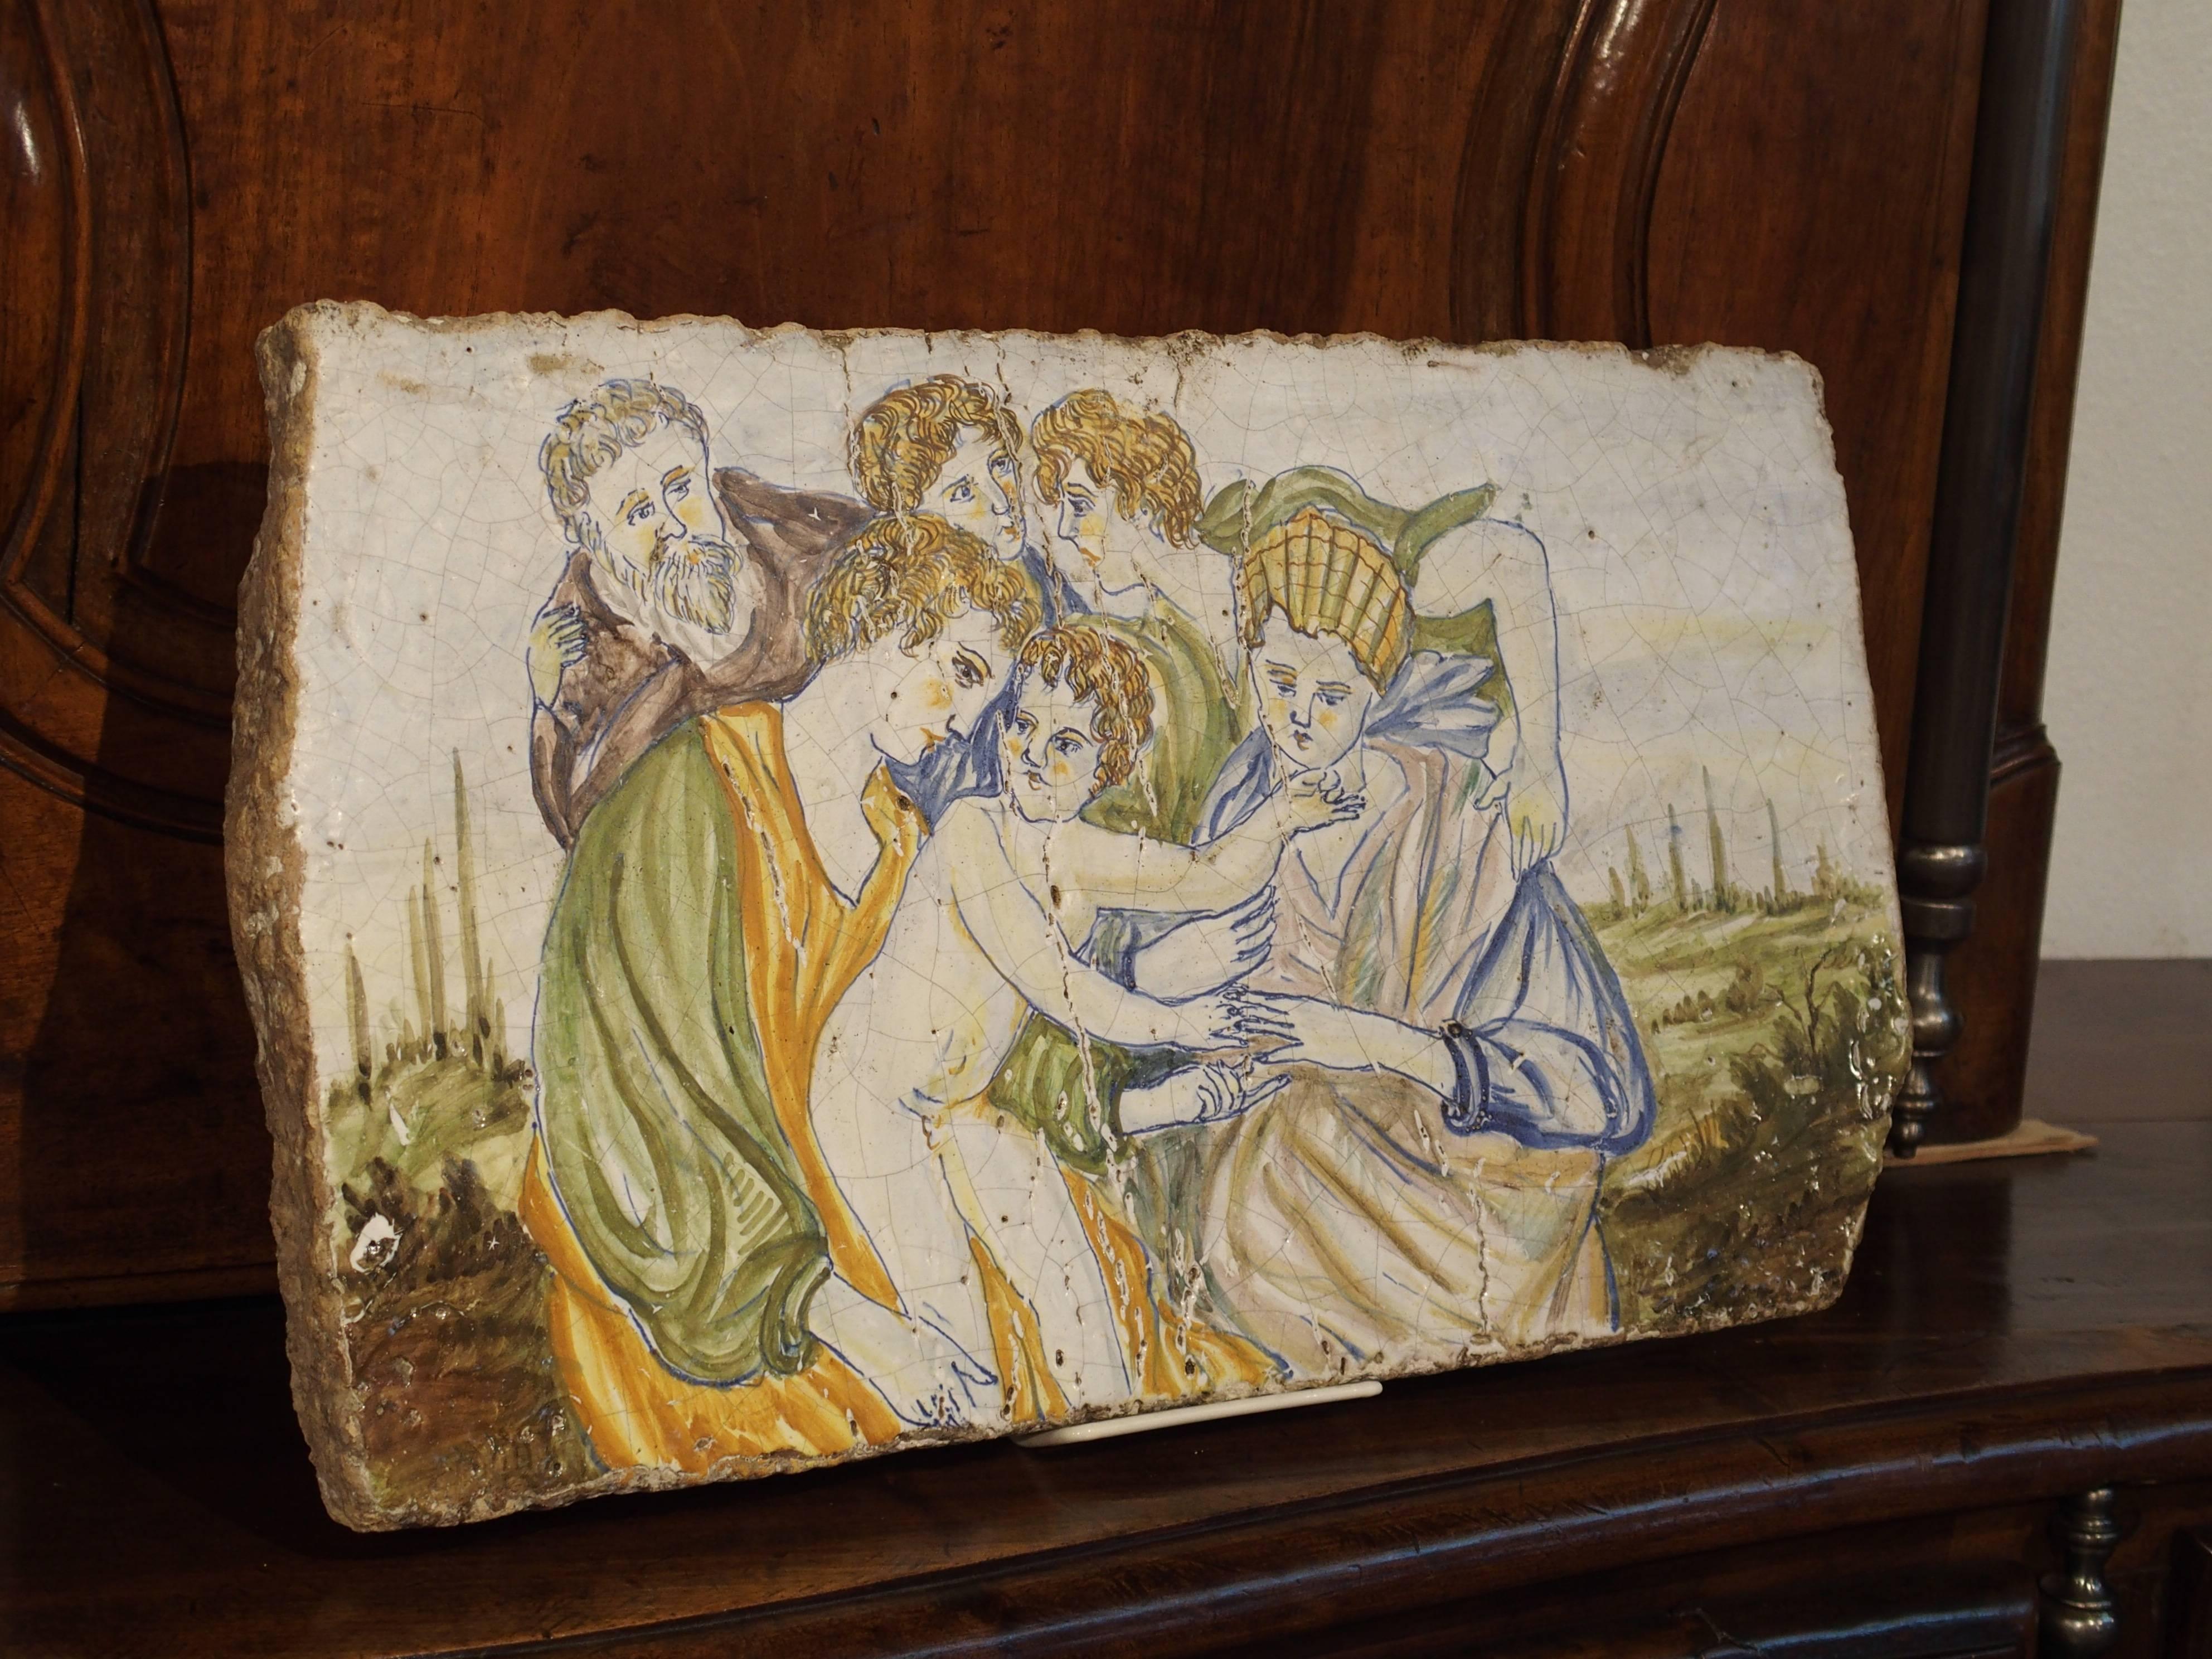 This impressive and very thick Majolica or Maiolica tile is from Italy and has hand-painted scenes known as istoriato wares (painted with stories). These scenes were painted on a white background in bright colors of blue, yellow, orange, green and